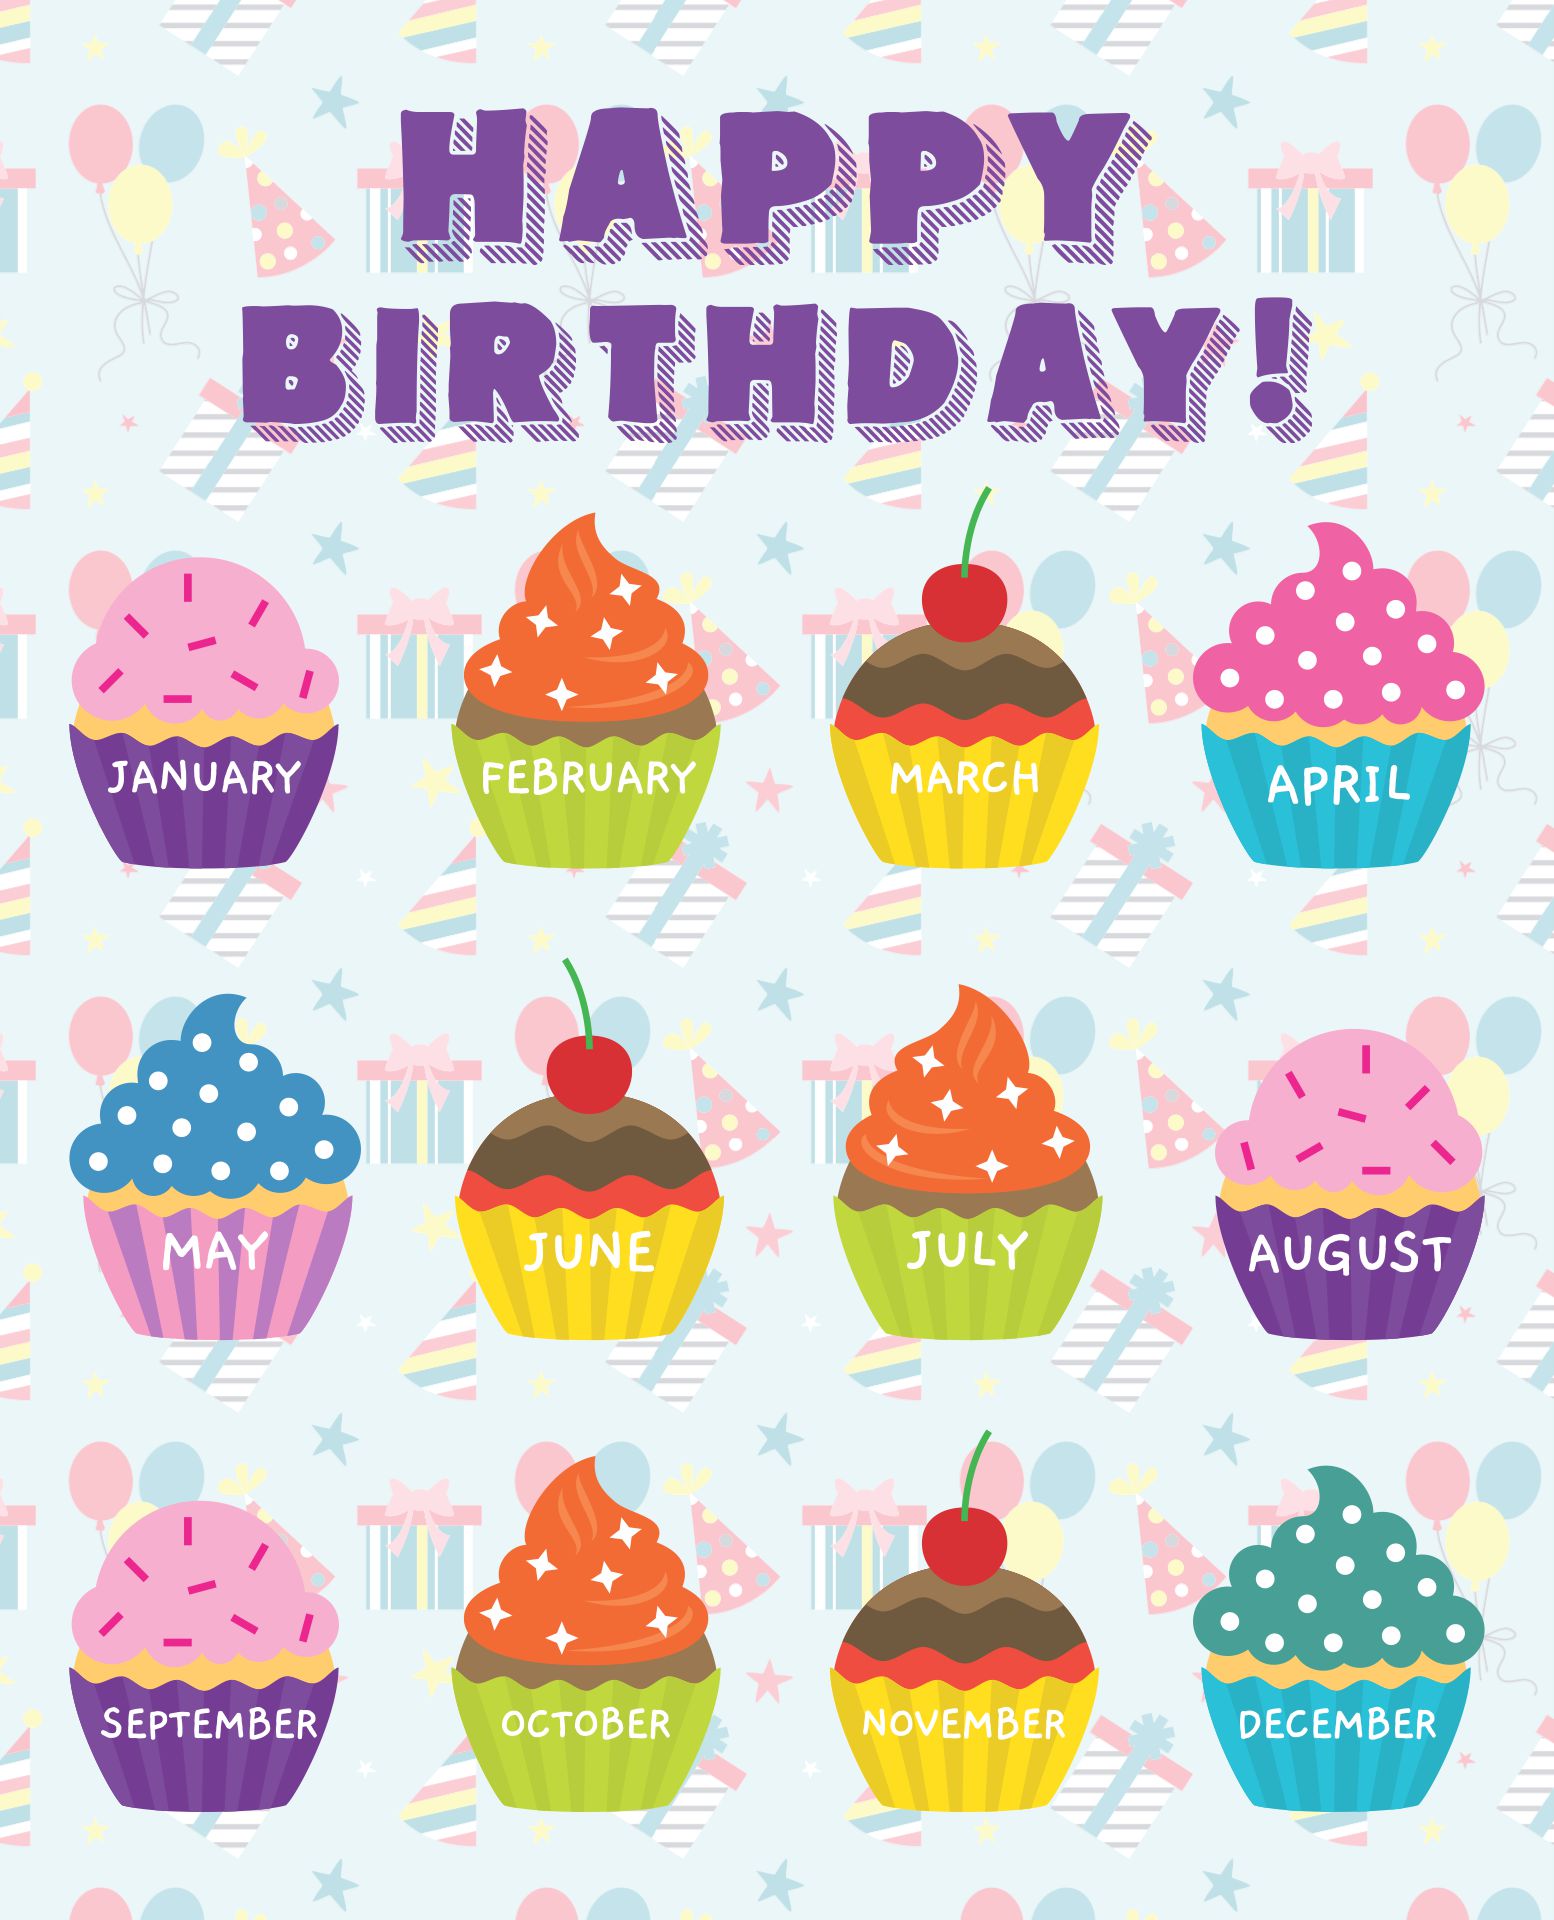 7 Best Images Of Cupcake Birthday Printables For Classroom Classroom 